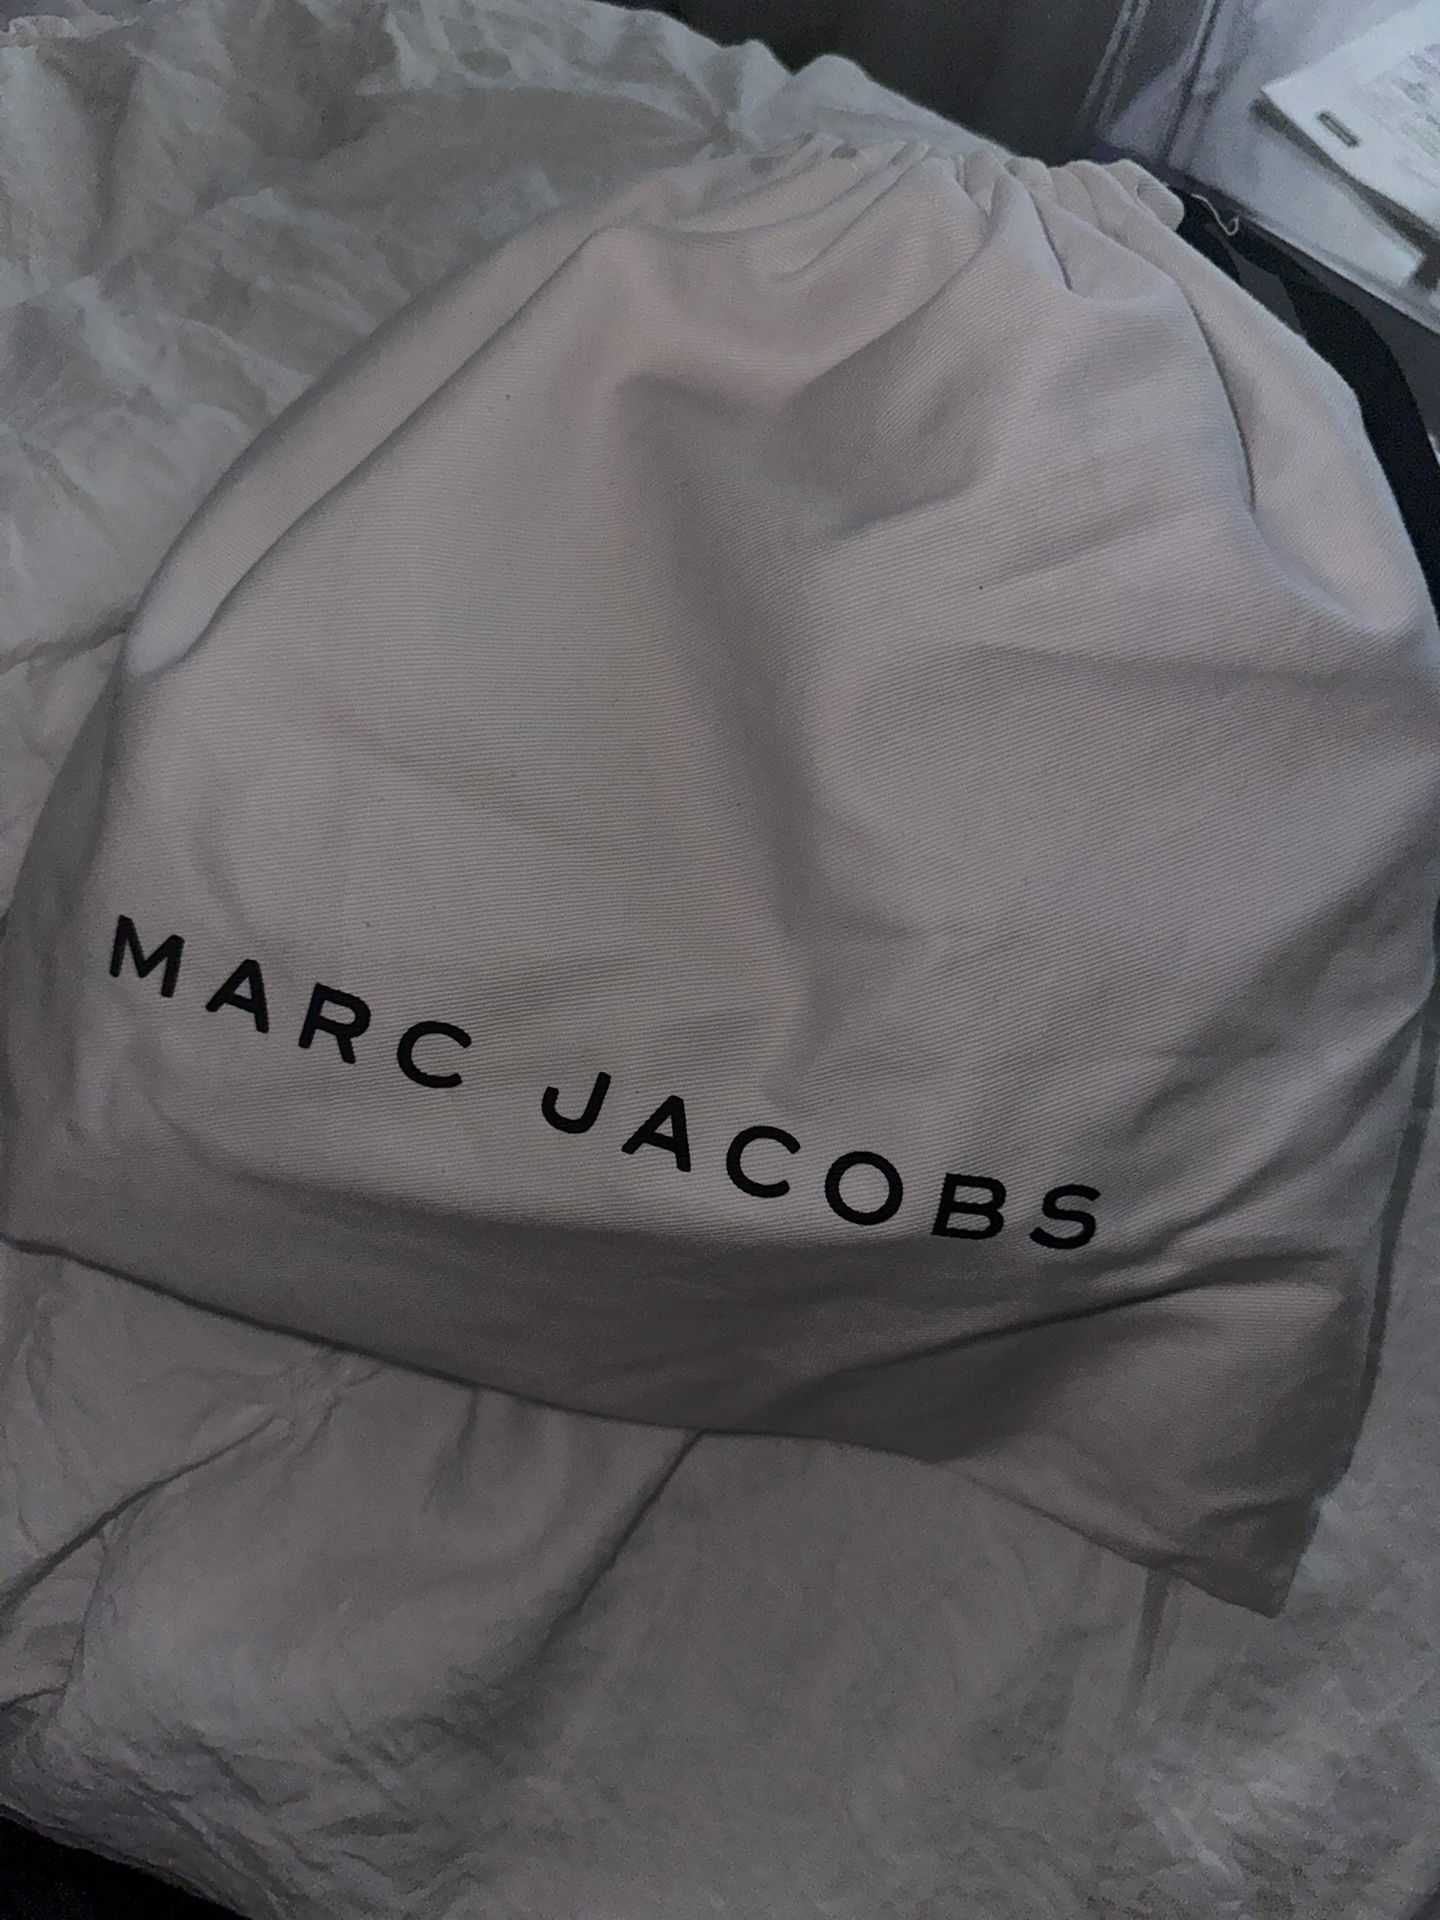 MARC JACOBS CROSS BODY LEATHER PURSE